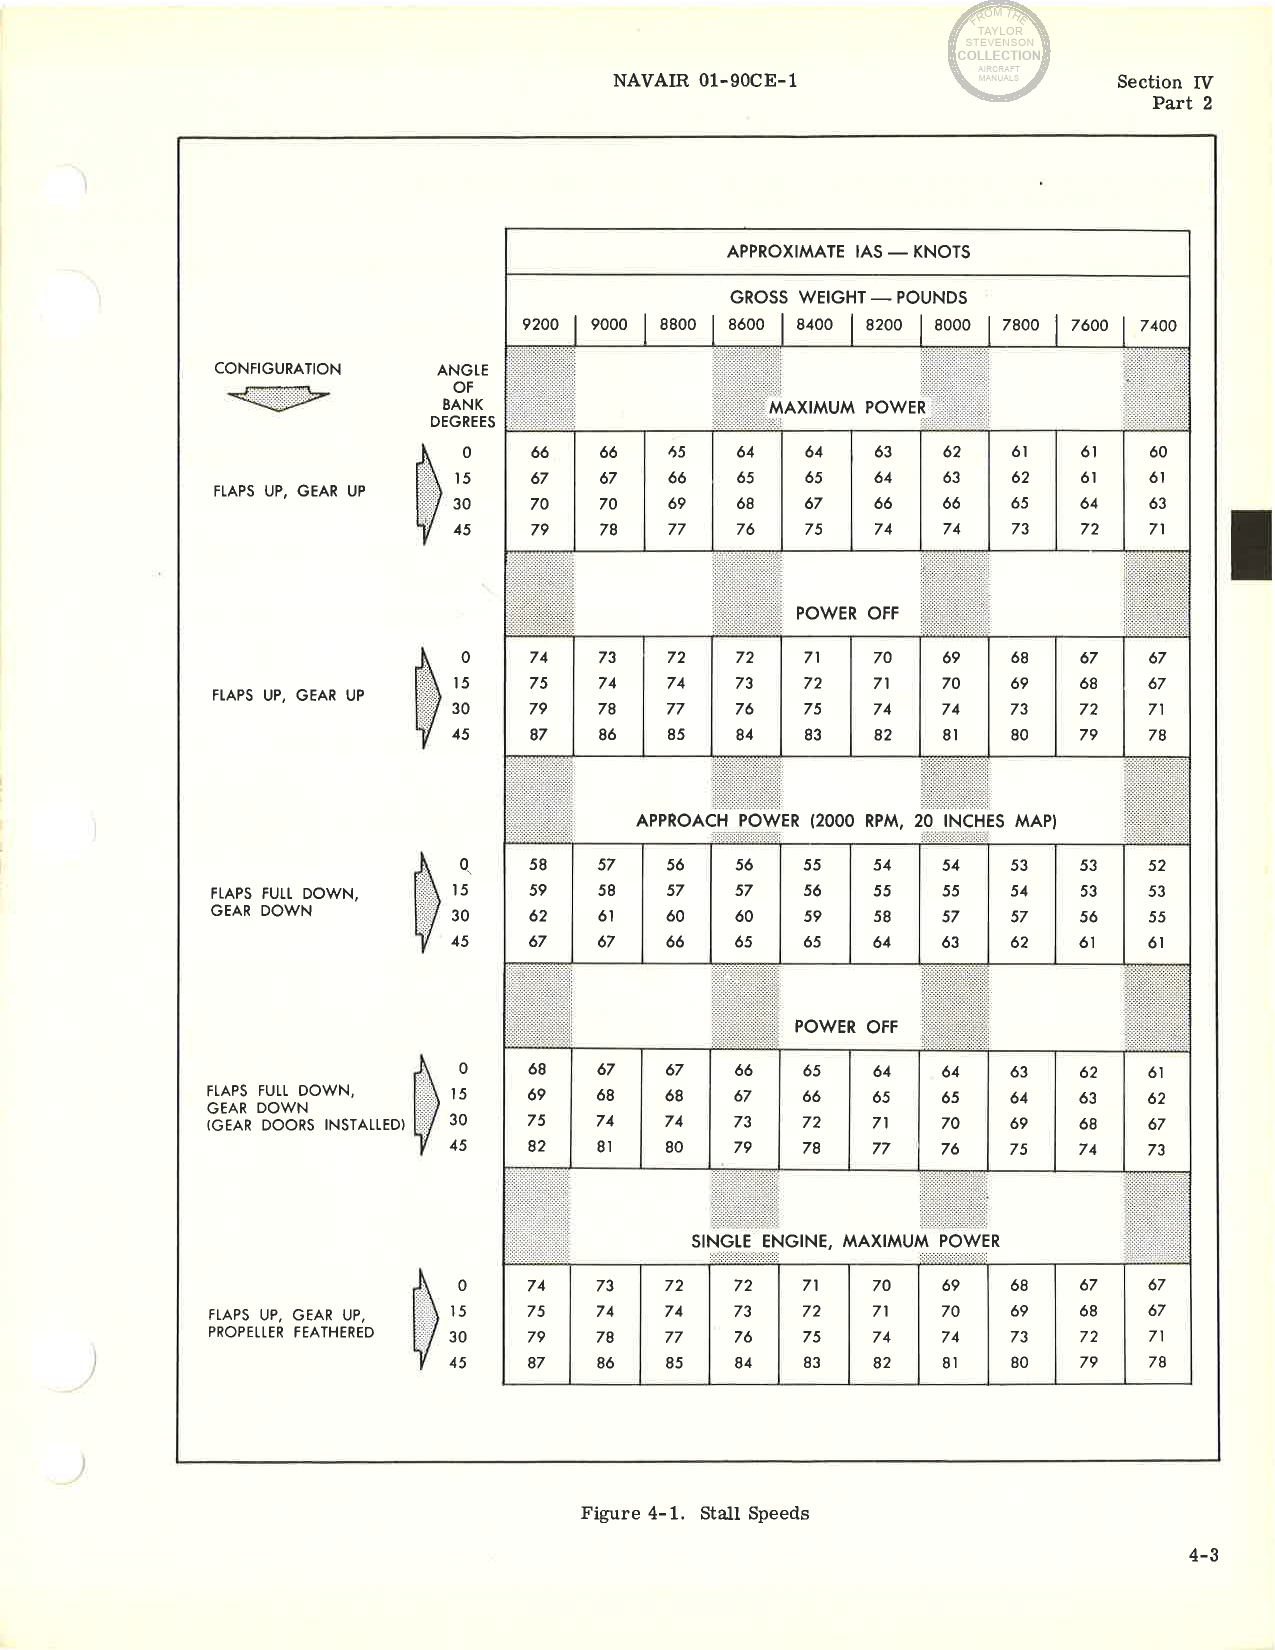 Sample page 77 from AirCorps Library document: NATOPS Flight Manual -  UC-45J - RC-45J